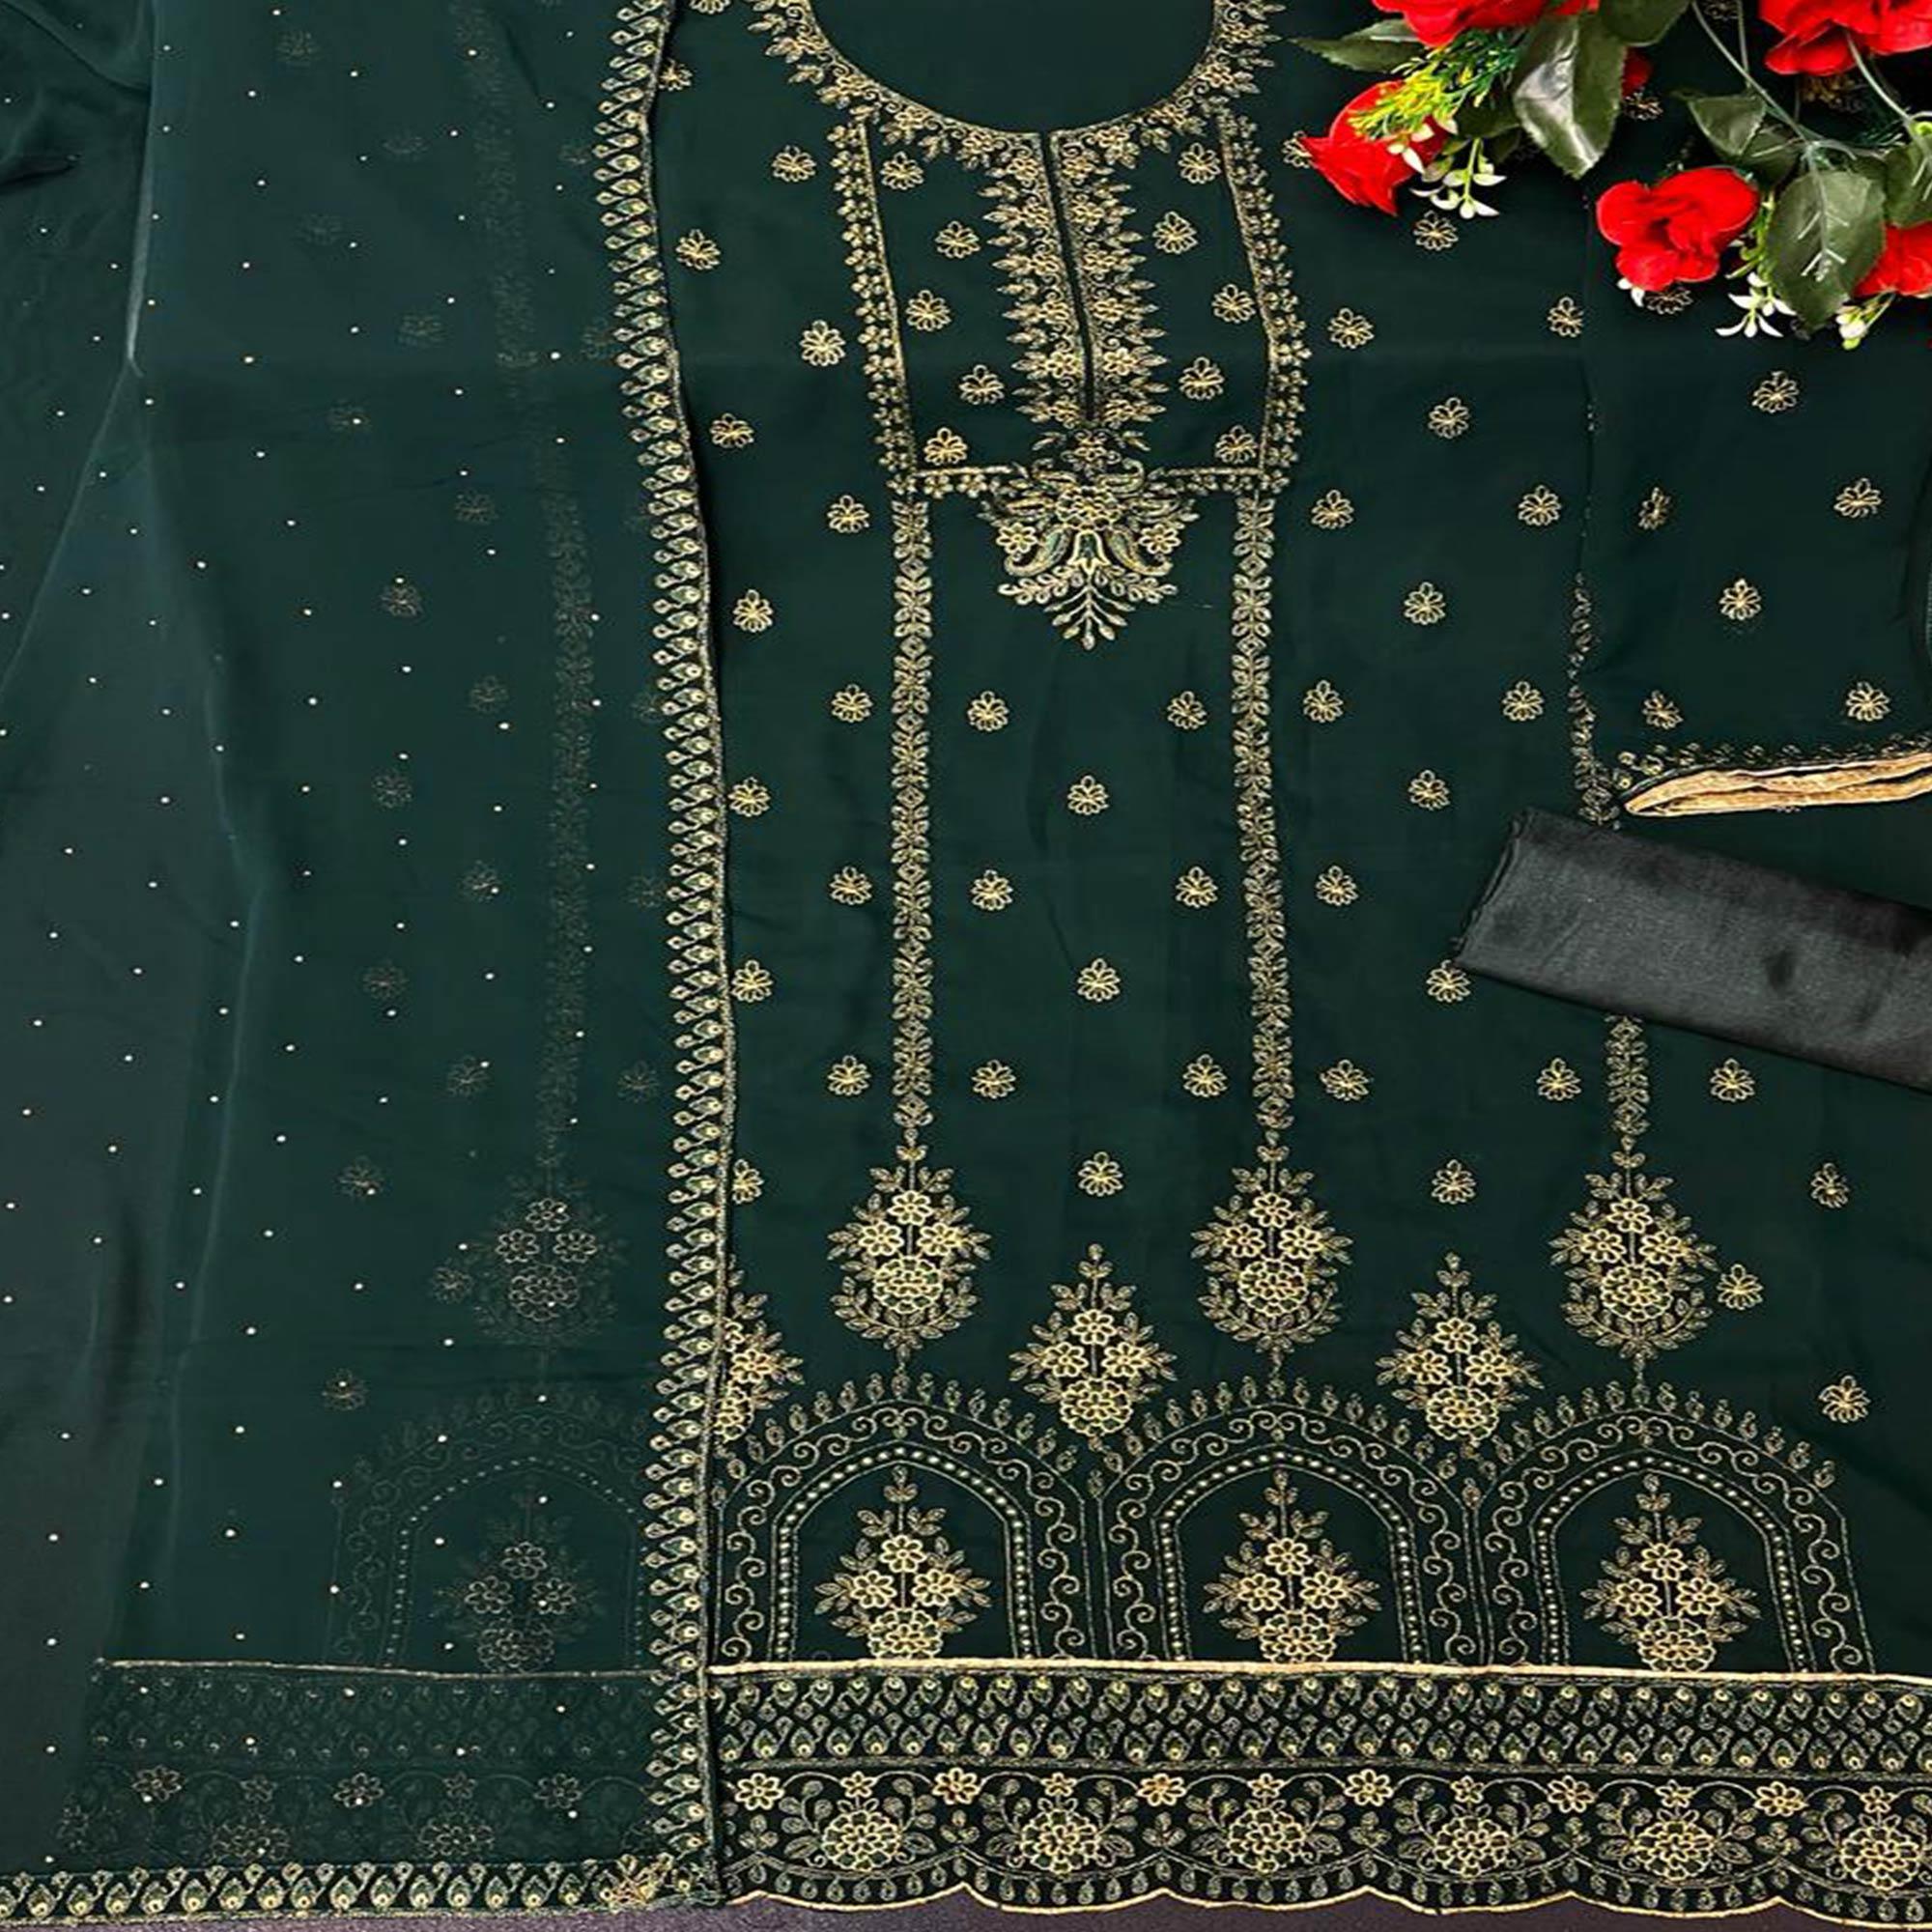 Green Floral Embroidered Georgette Pakistani Suit - Peachmode